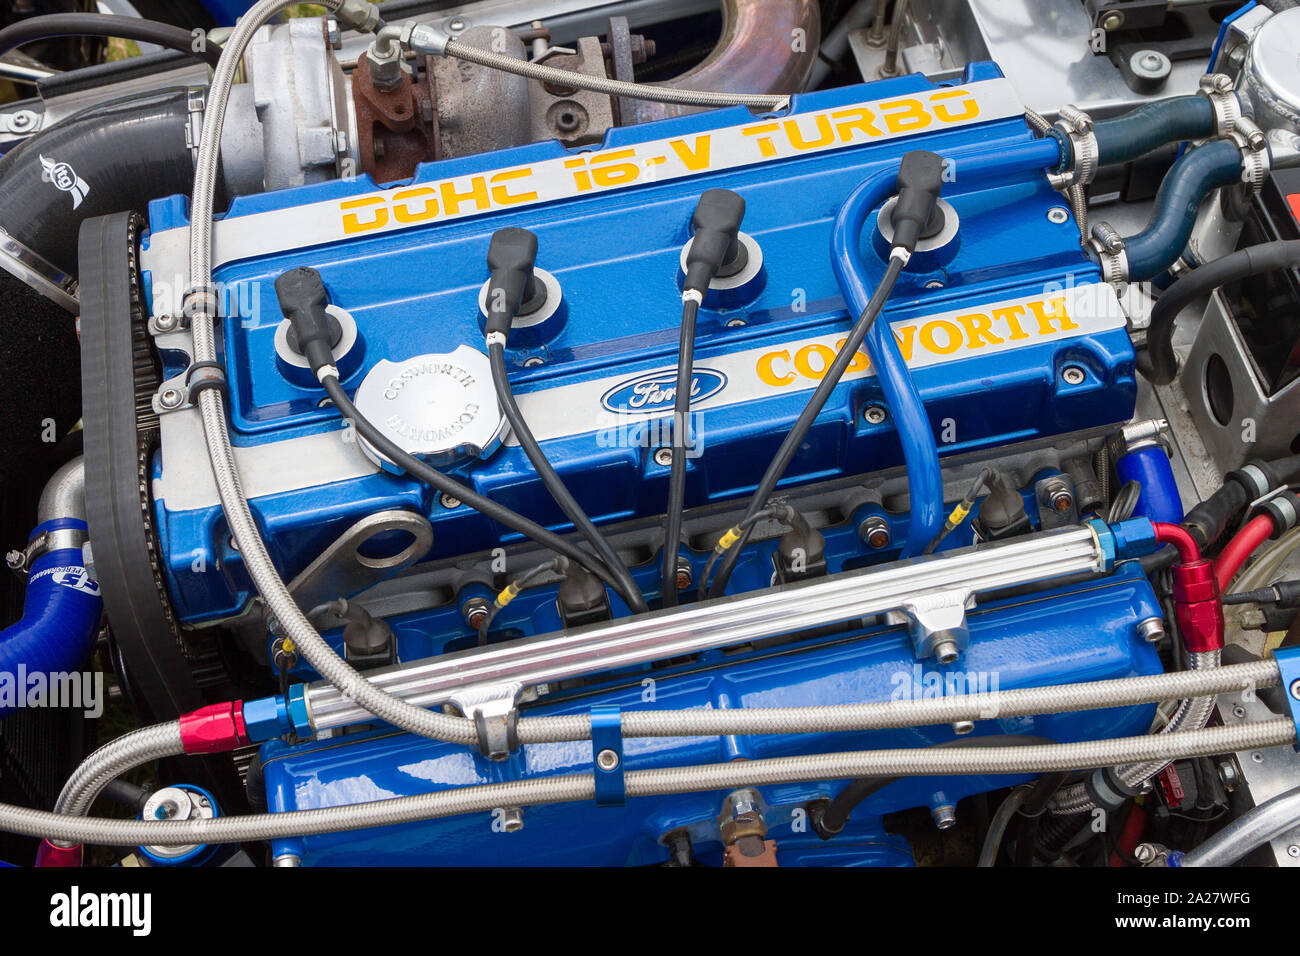 A beautifully restored DOHC 16V Turbo blue and chrome Ford Cosworth engine Stock Photo